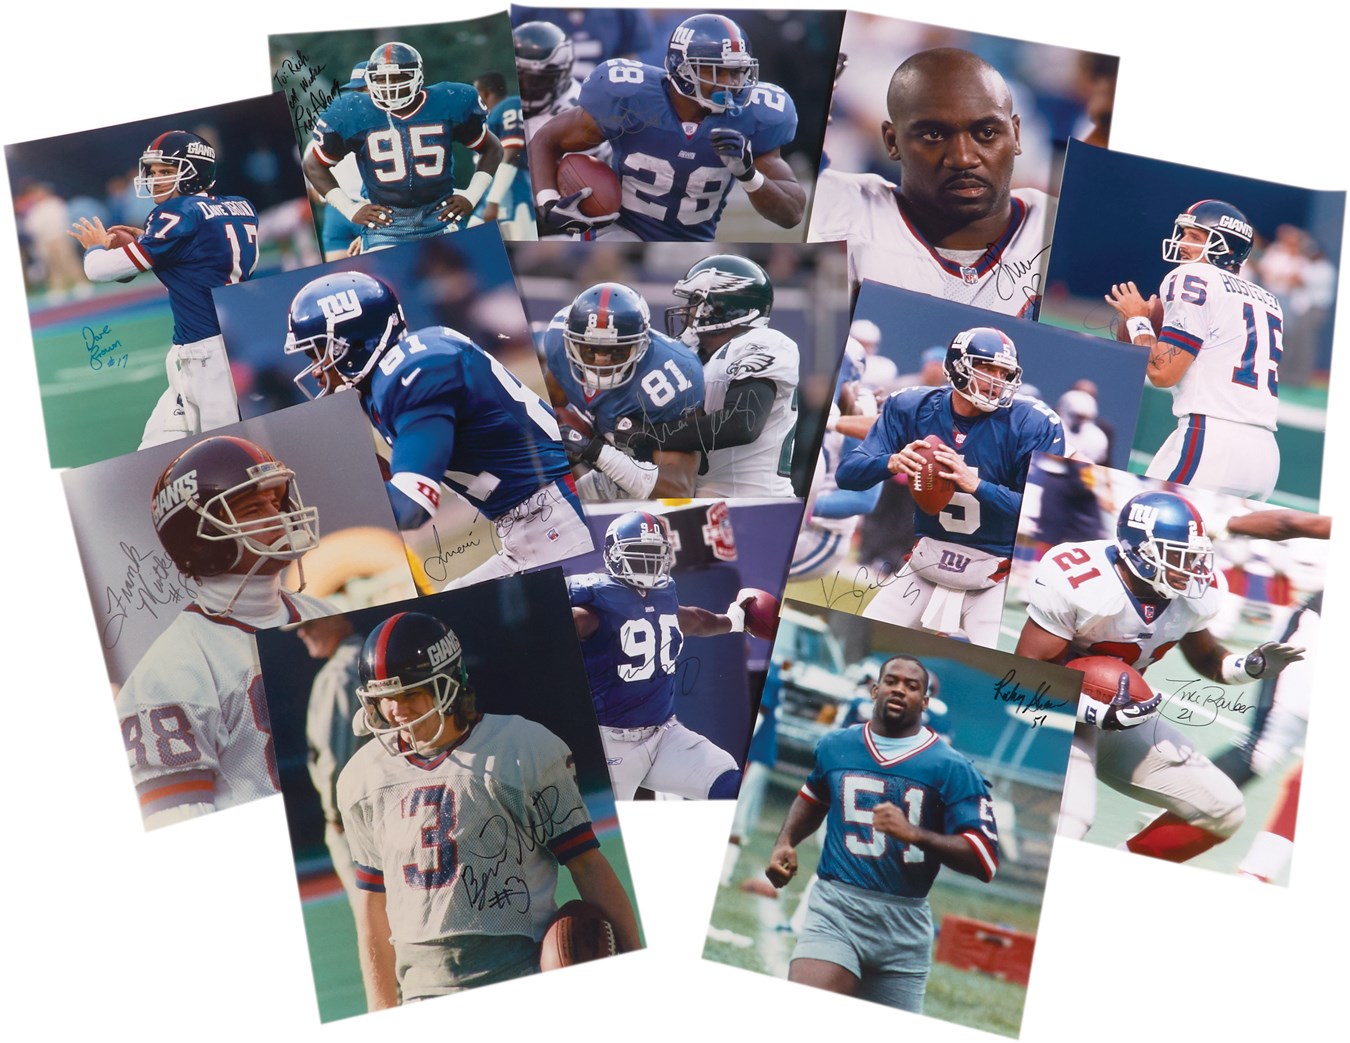 1980s-90s Super Bowl Champion & NY Giants 16x20” In Person Signed Photographs from VIP Photographer Richard Brightly (32)